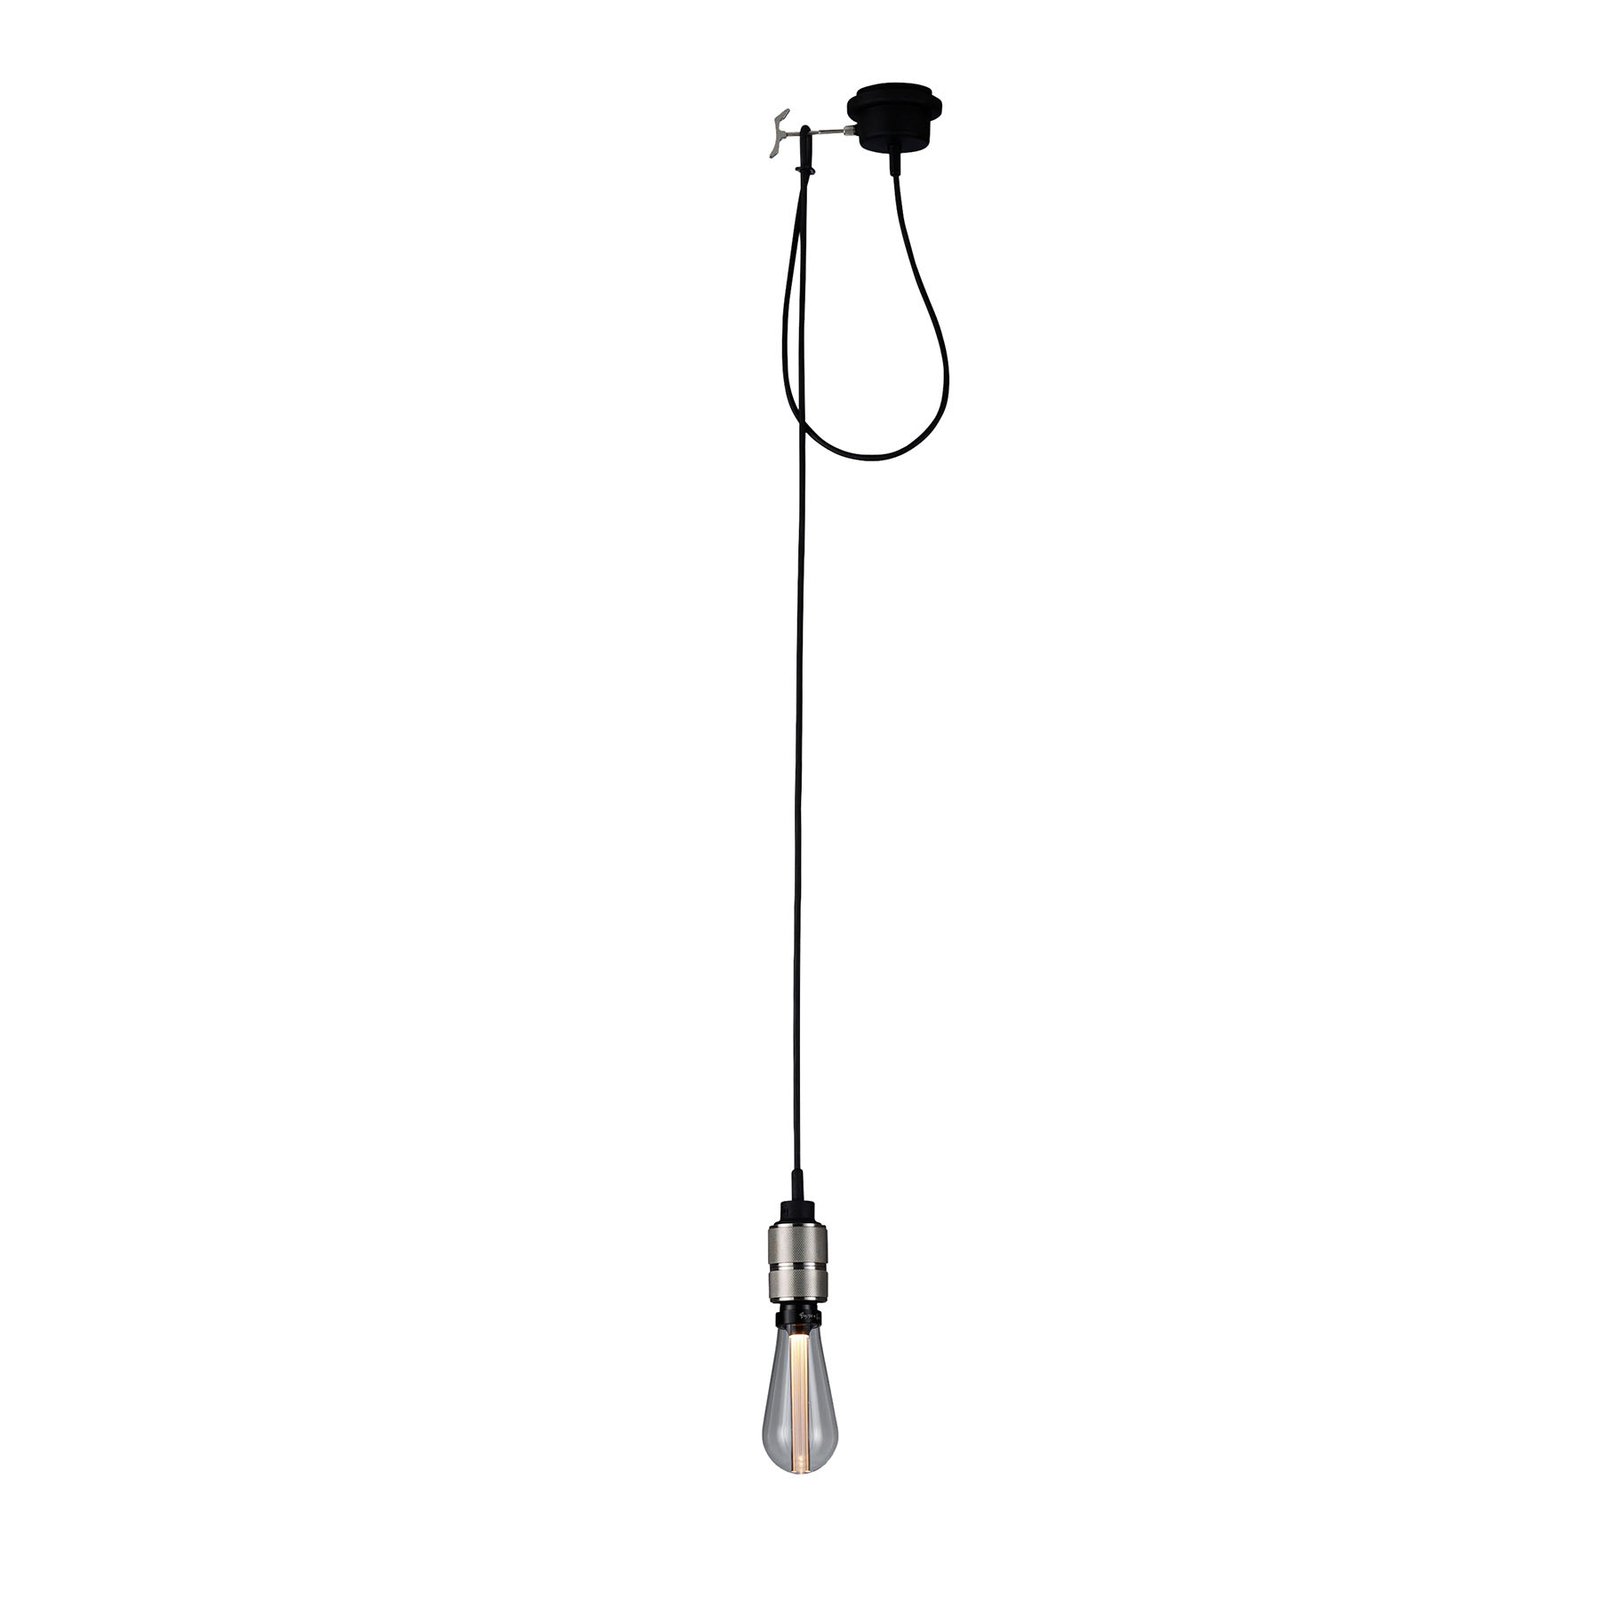 Buster + Punch Hooked 1.0 nude hanglamp staal